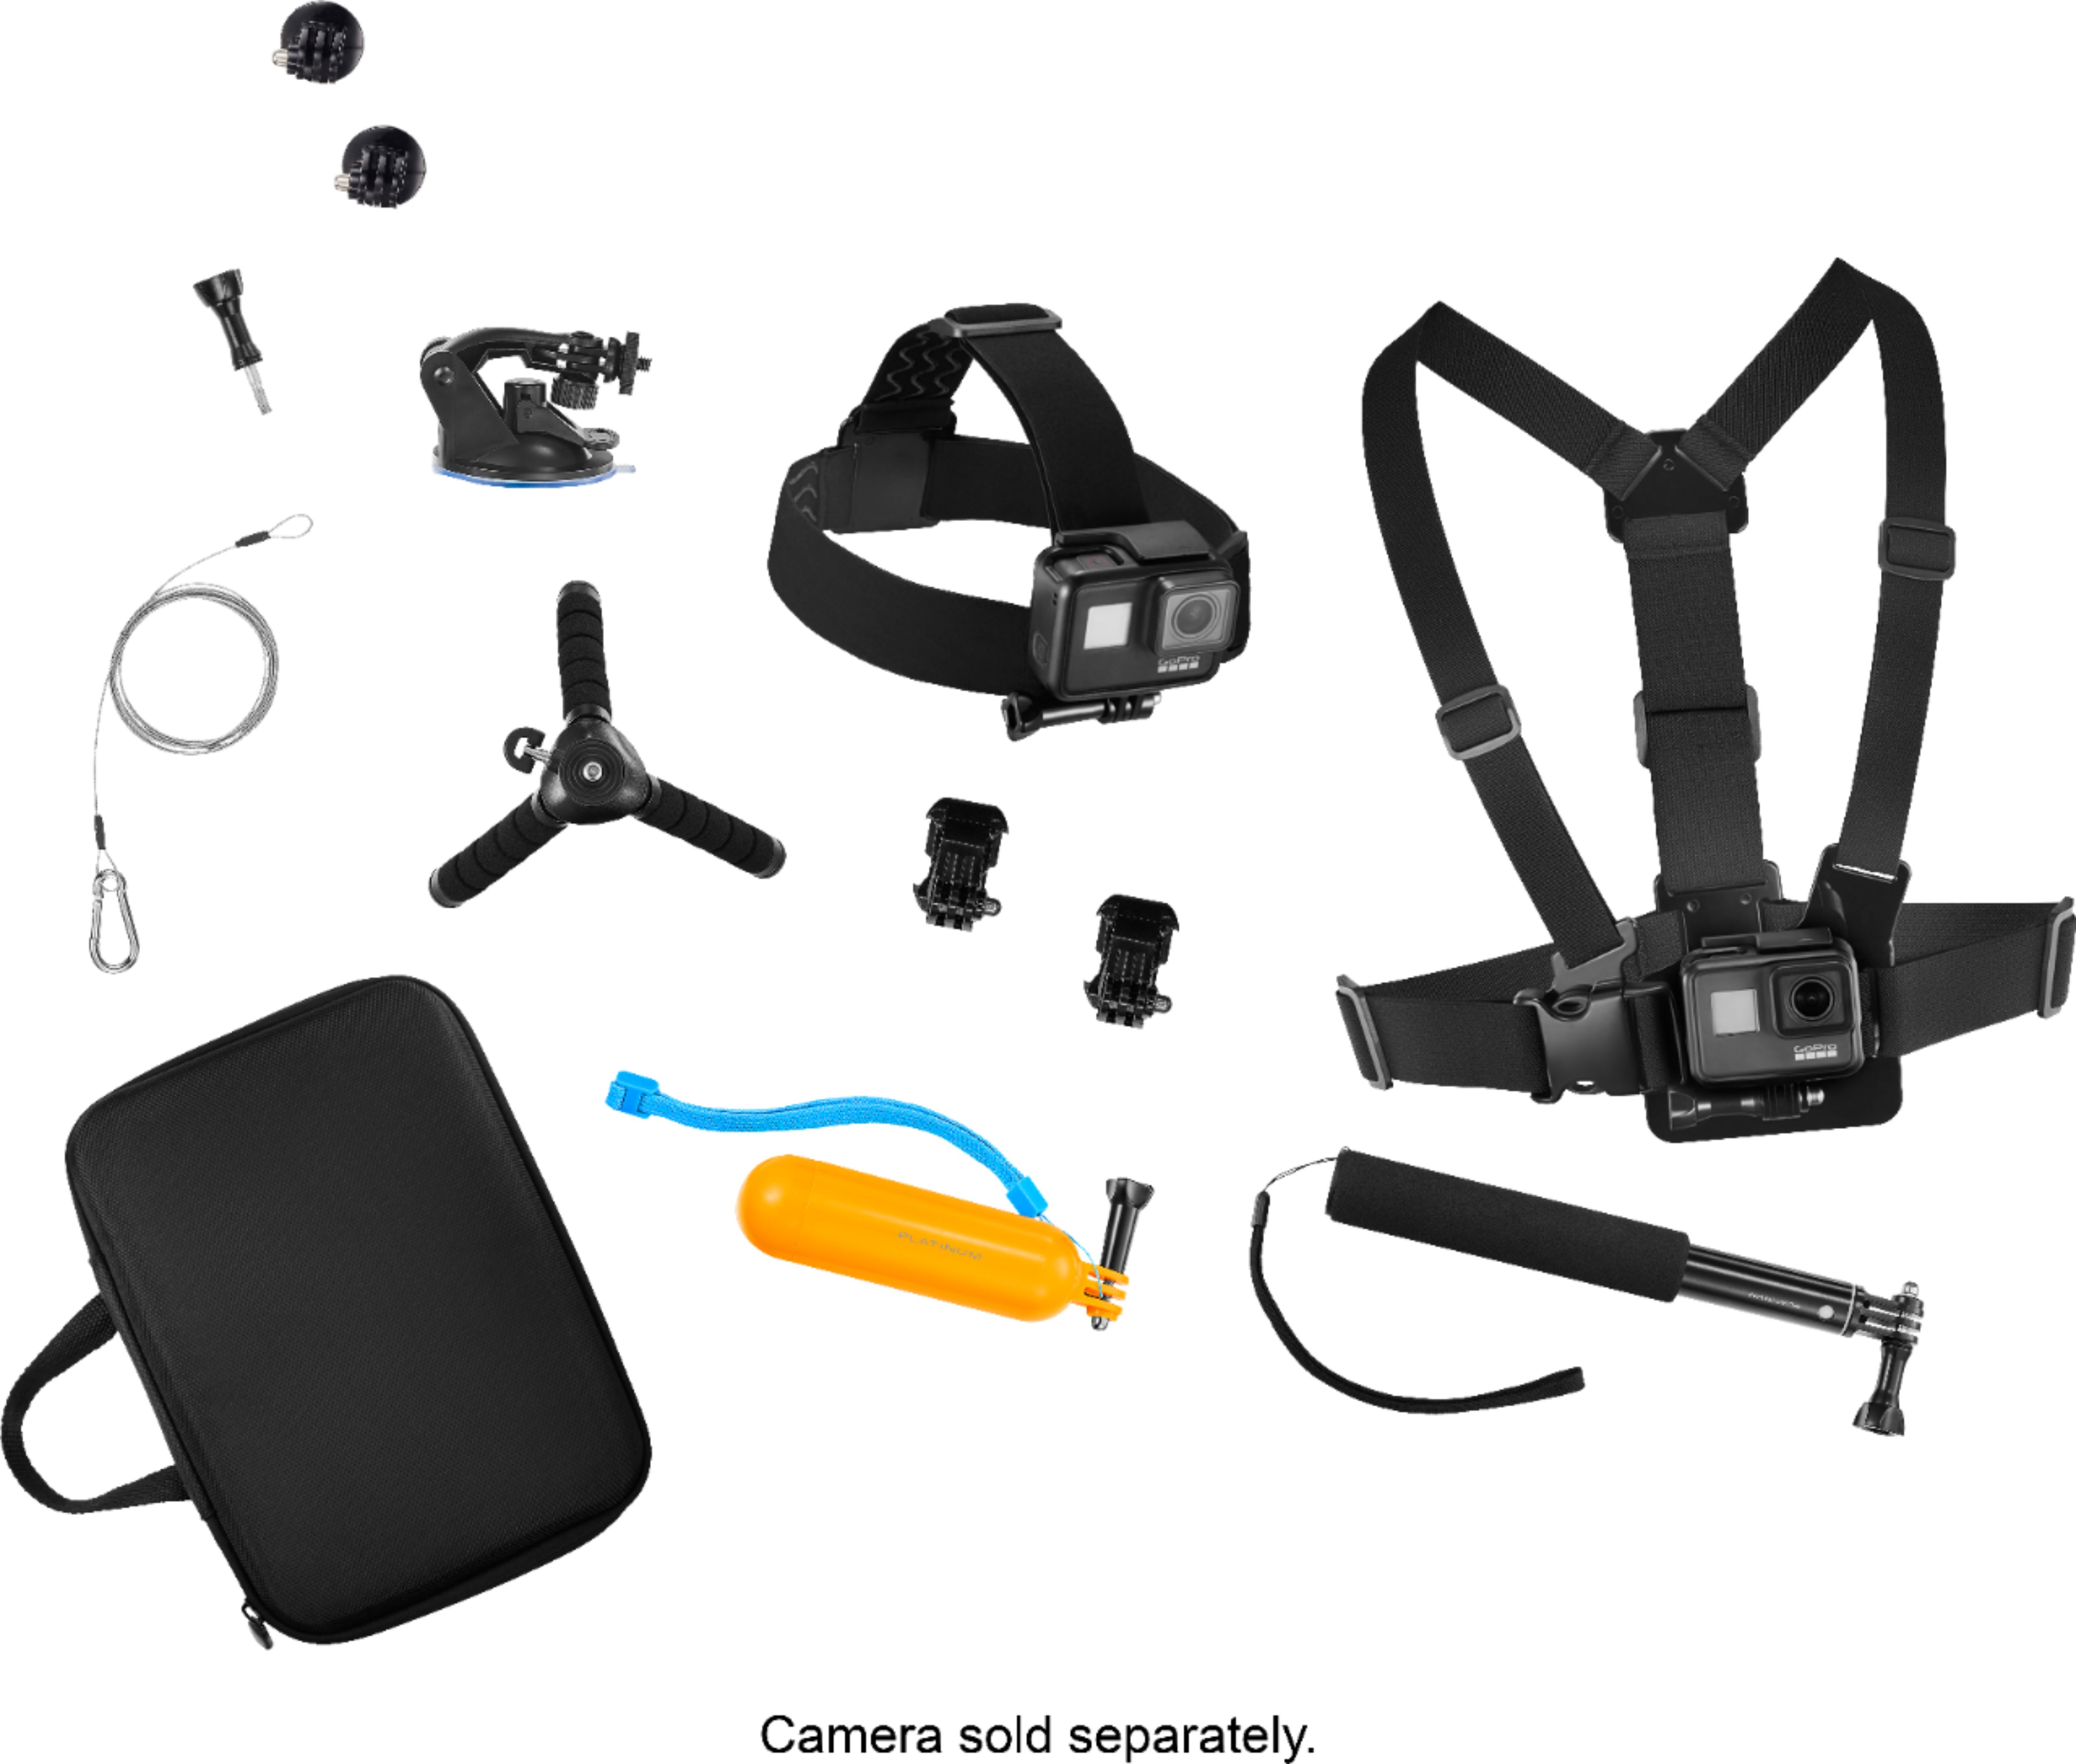 0600603260056 - PLATINUM™ - ESSENTIAL ACCESSORY KIT FOR GOPRO ACTION CAMERAS